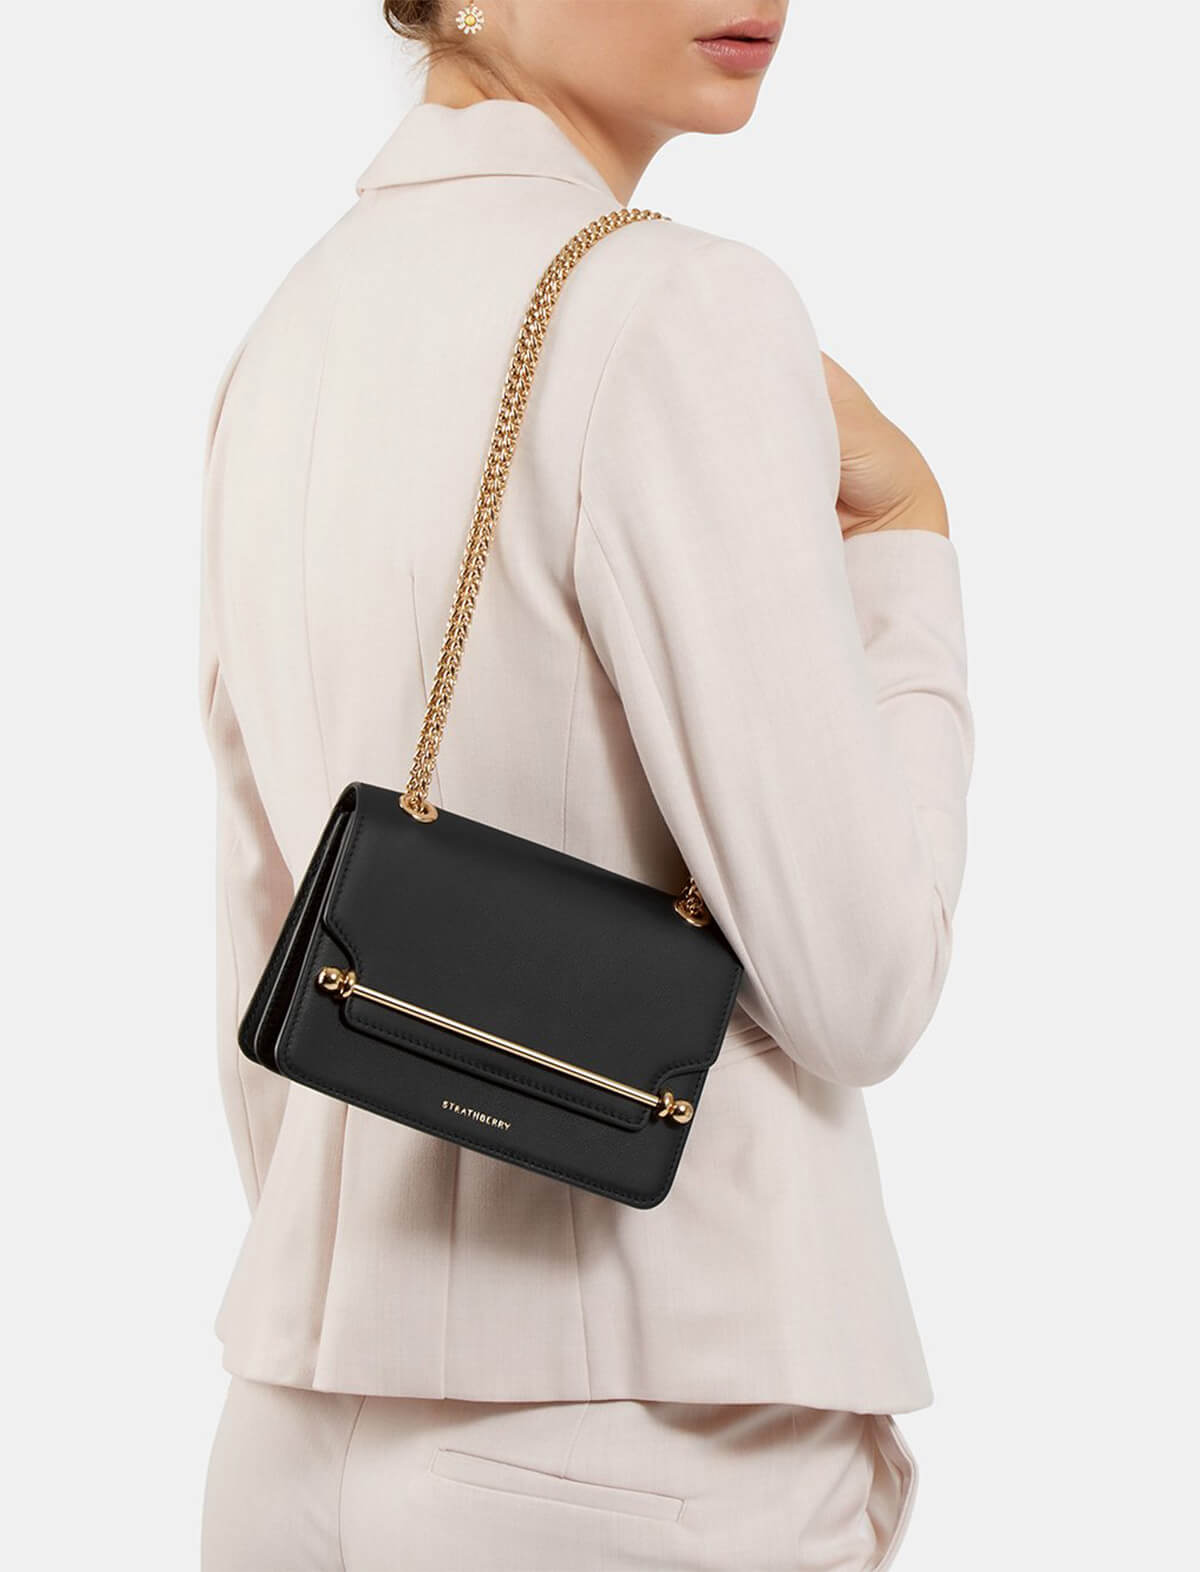 STRATHBERRY East/ West Mini Bag in Black